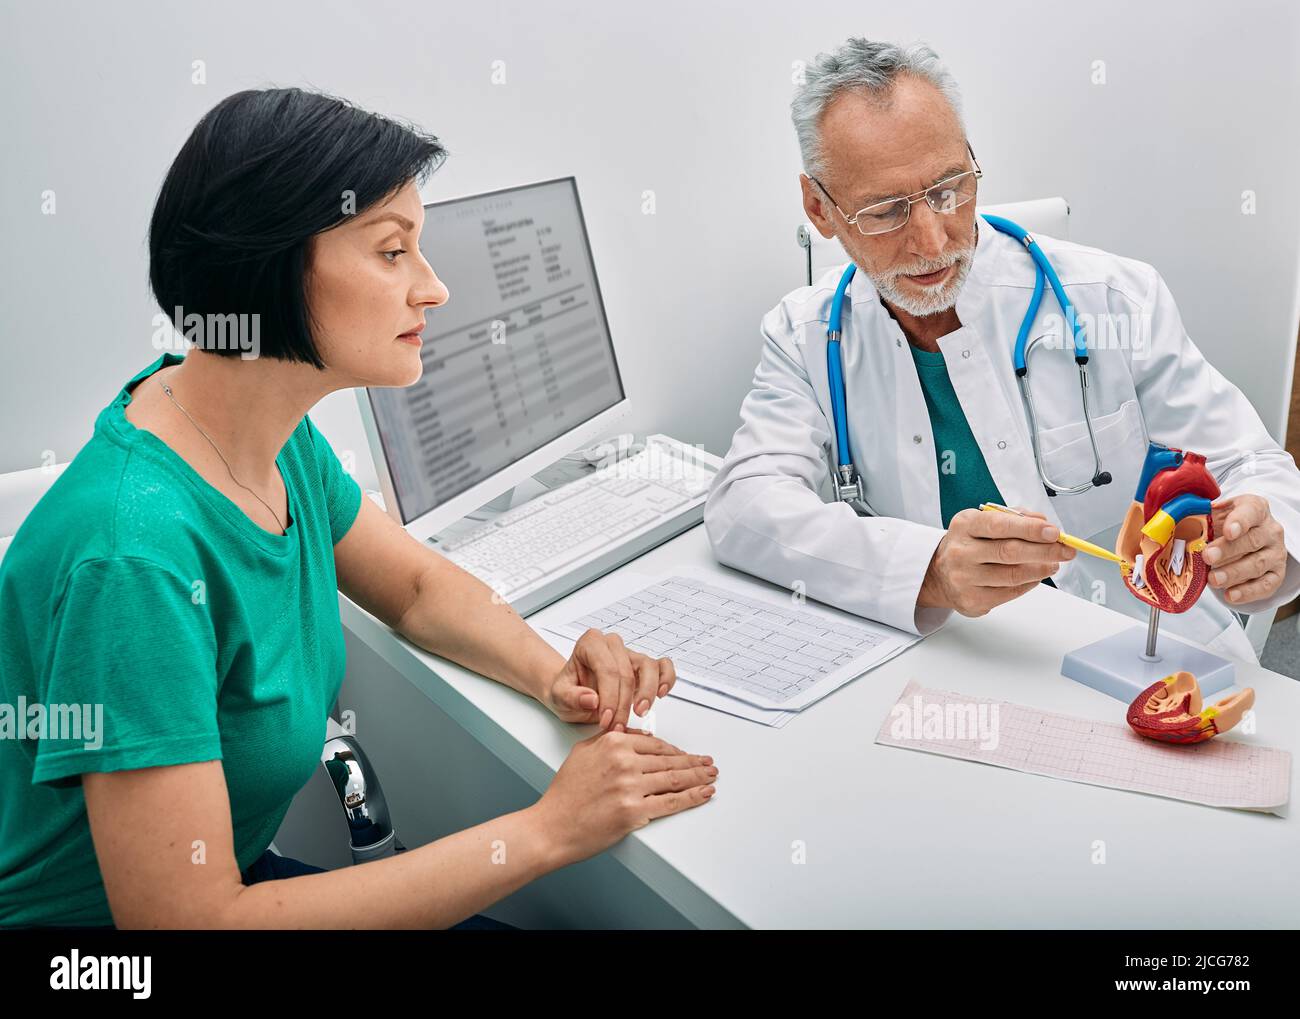 Cardiology consultation. Male doctor cardiologist consulting female patient with heart problems Stock Photo